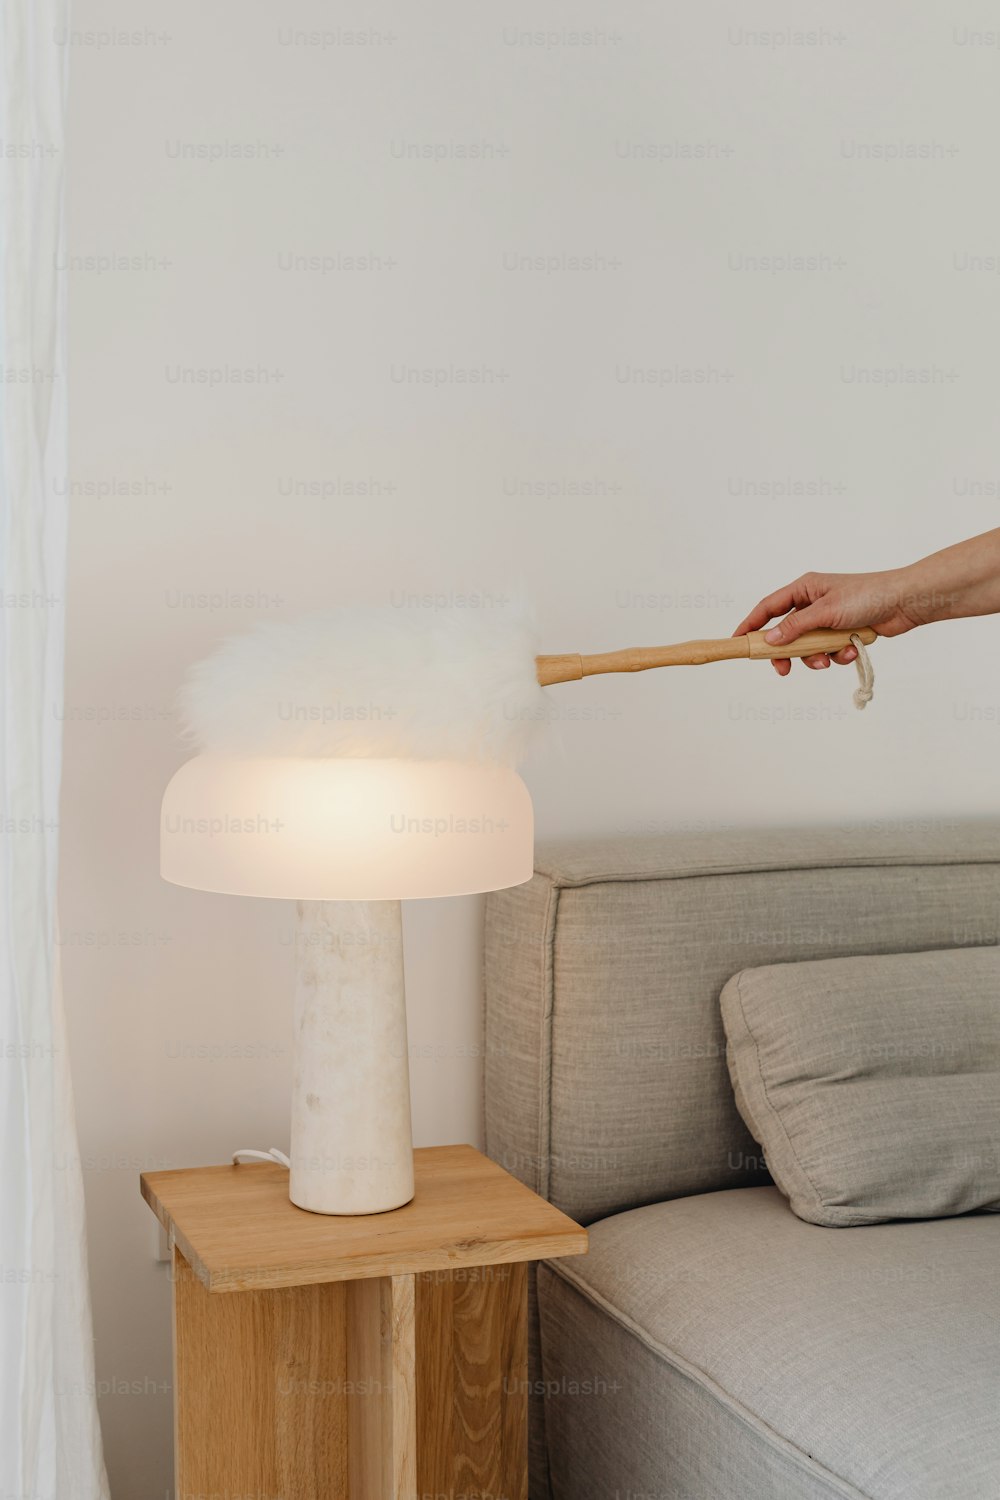 a person is holding a stick over a table lamp